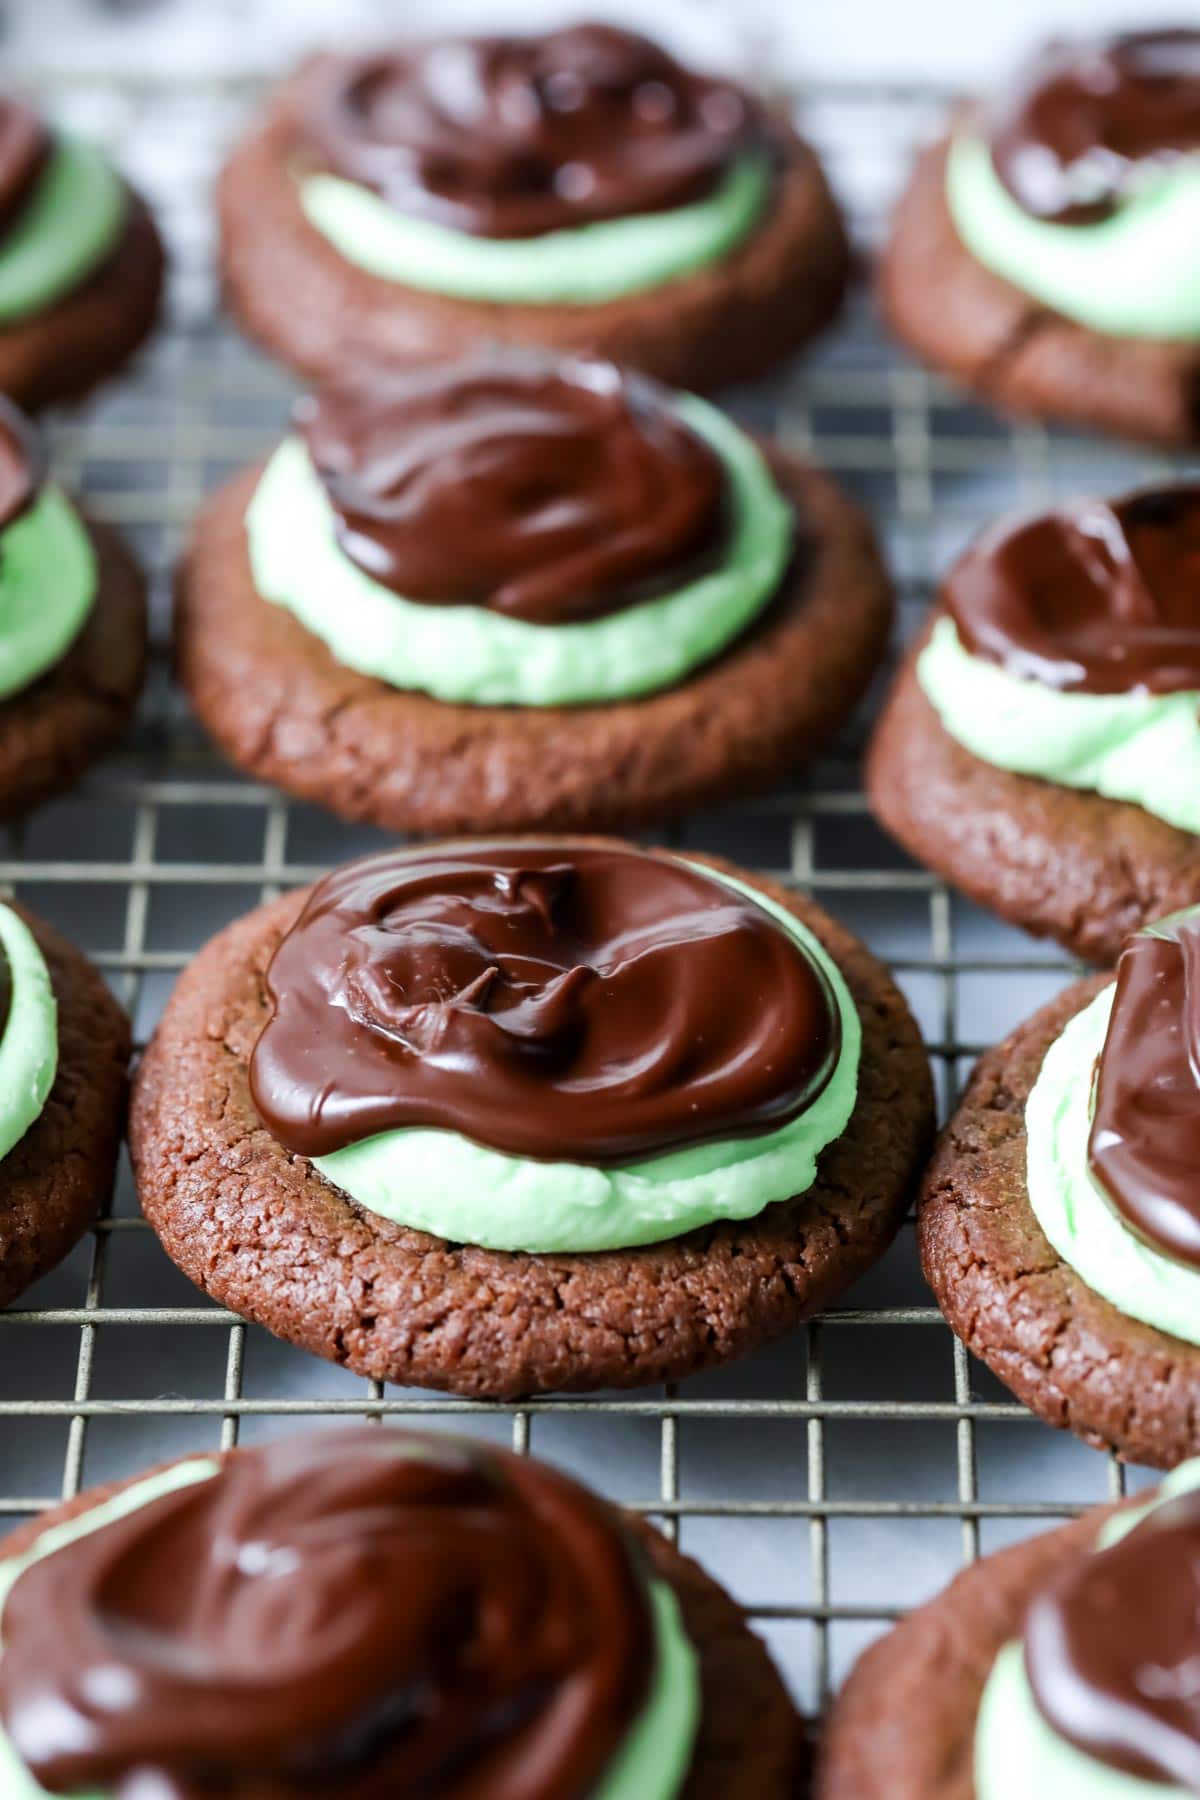 Mint chocolate cookies made with a chocolate cookie base, mint frosting, and chocolate ganache on a cooling rack.